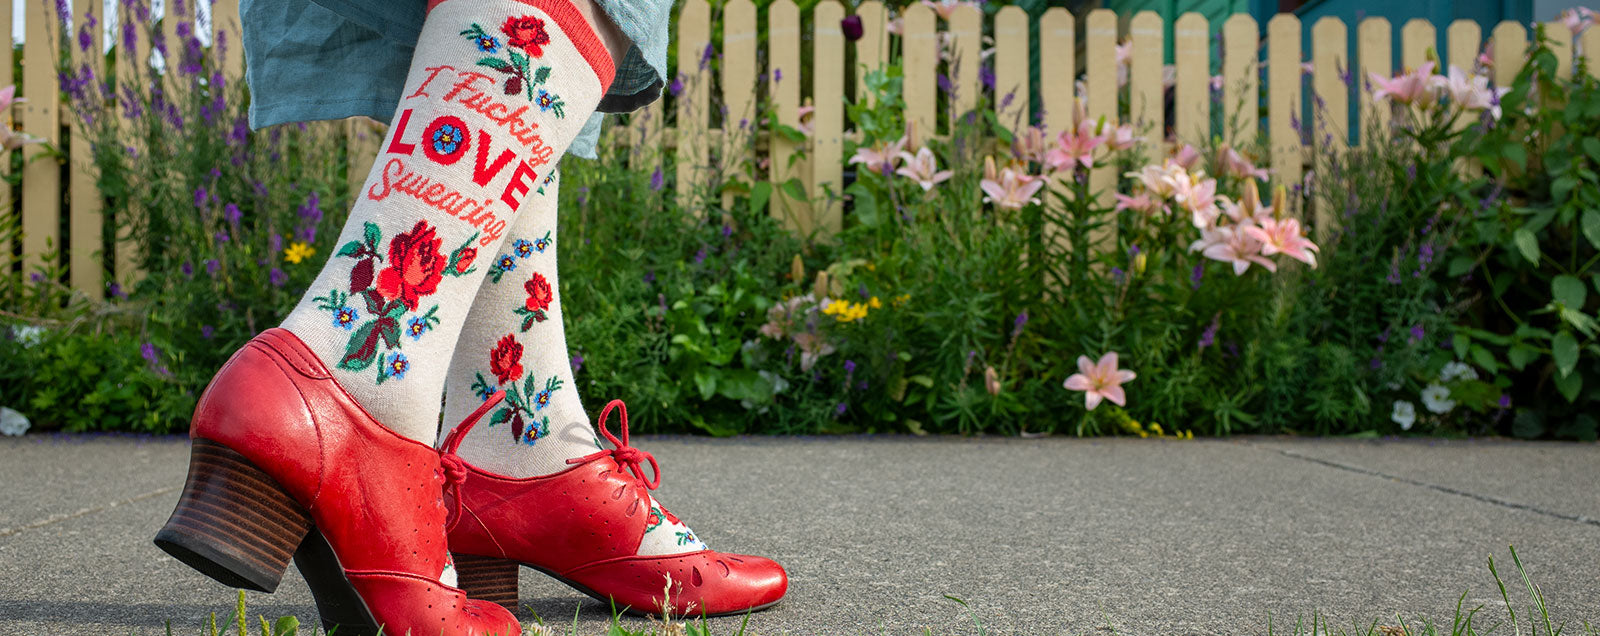 A woman wears cream floral crew socks that say “I Fucking LOVE Swearing" on the leg while walking next to a picket fence and garden.